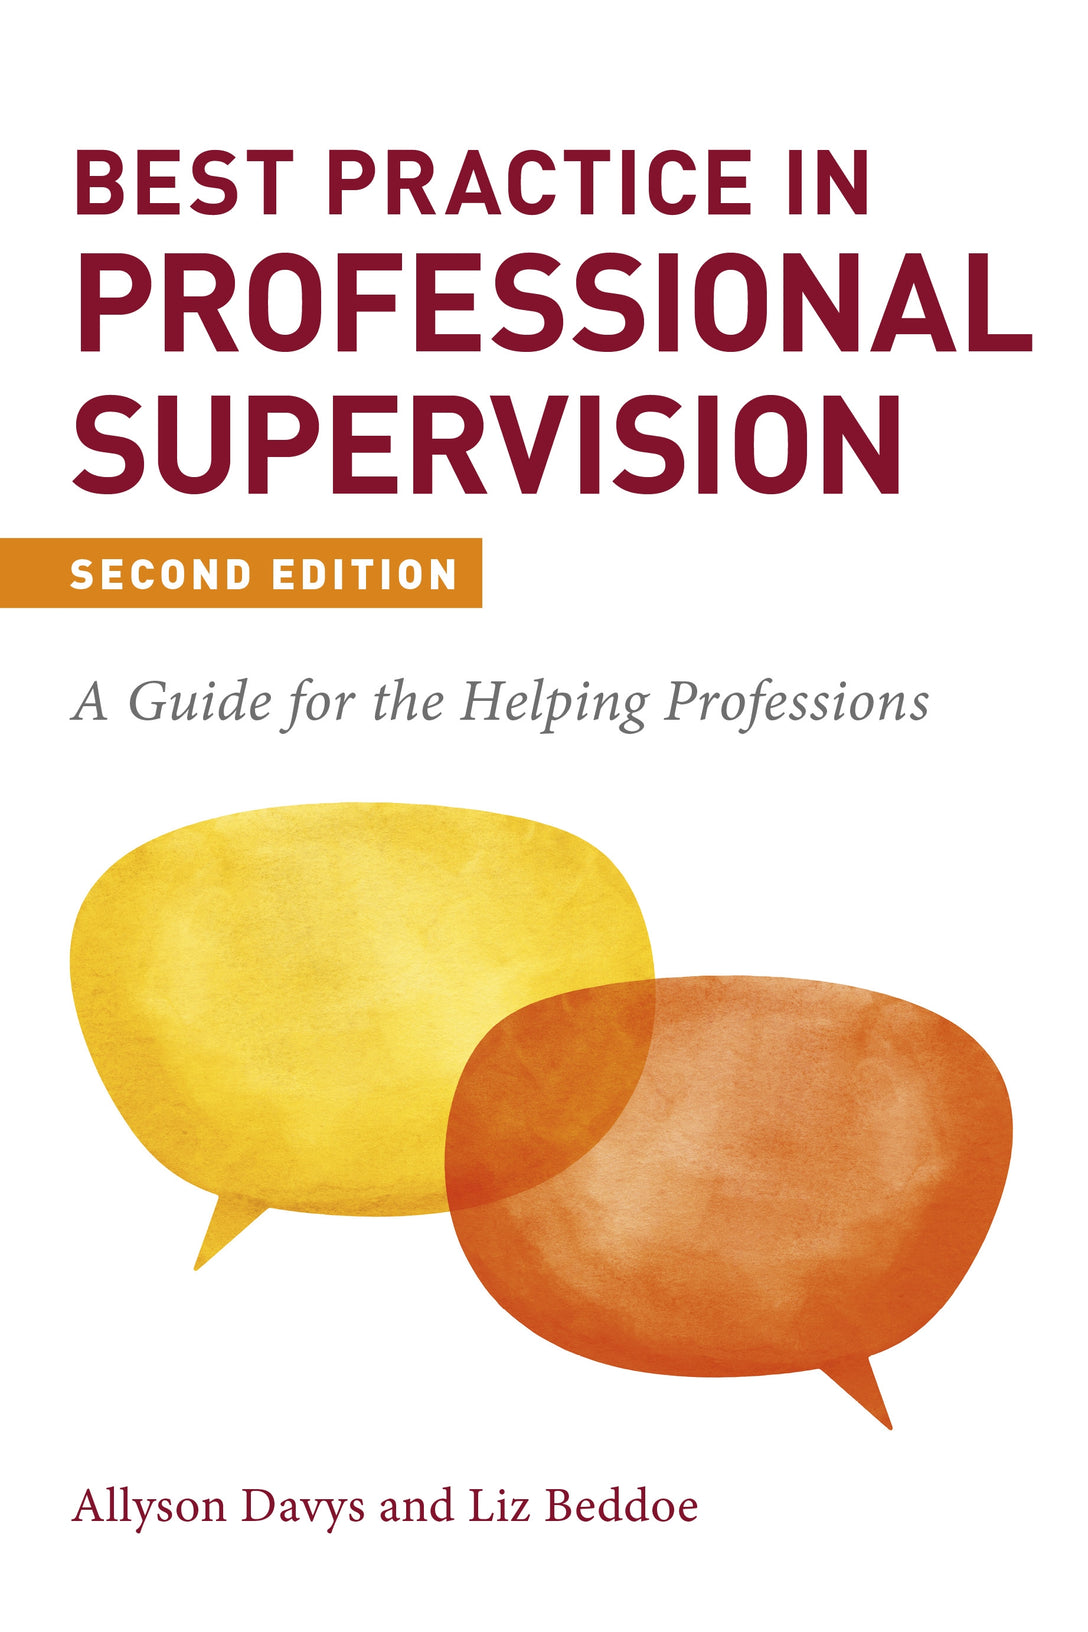 Best Practice in Professional Supervision, Second Edition by Allyson Davys, Liz Beddoe